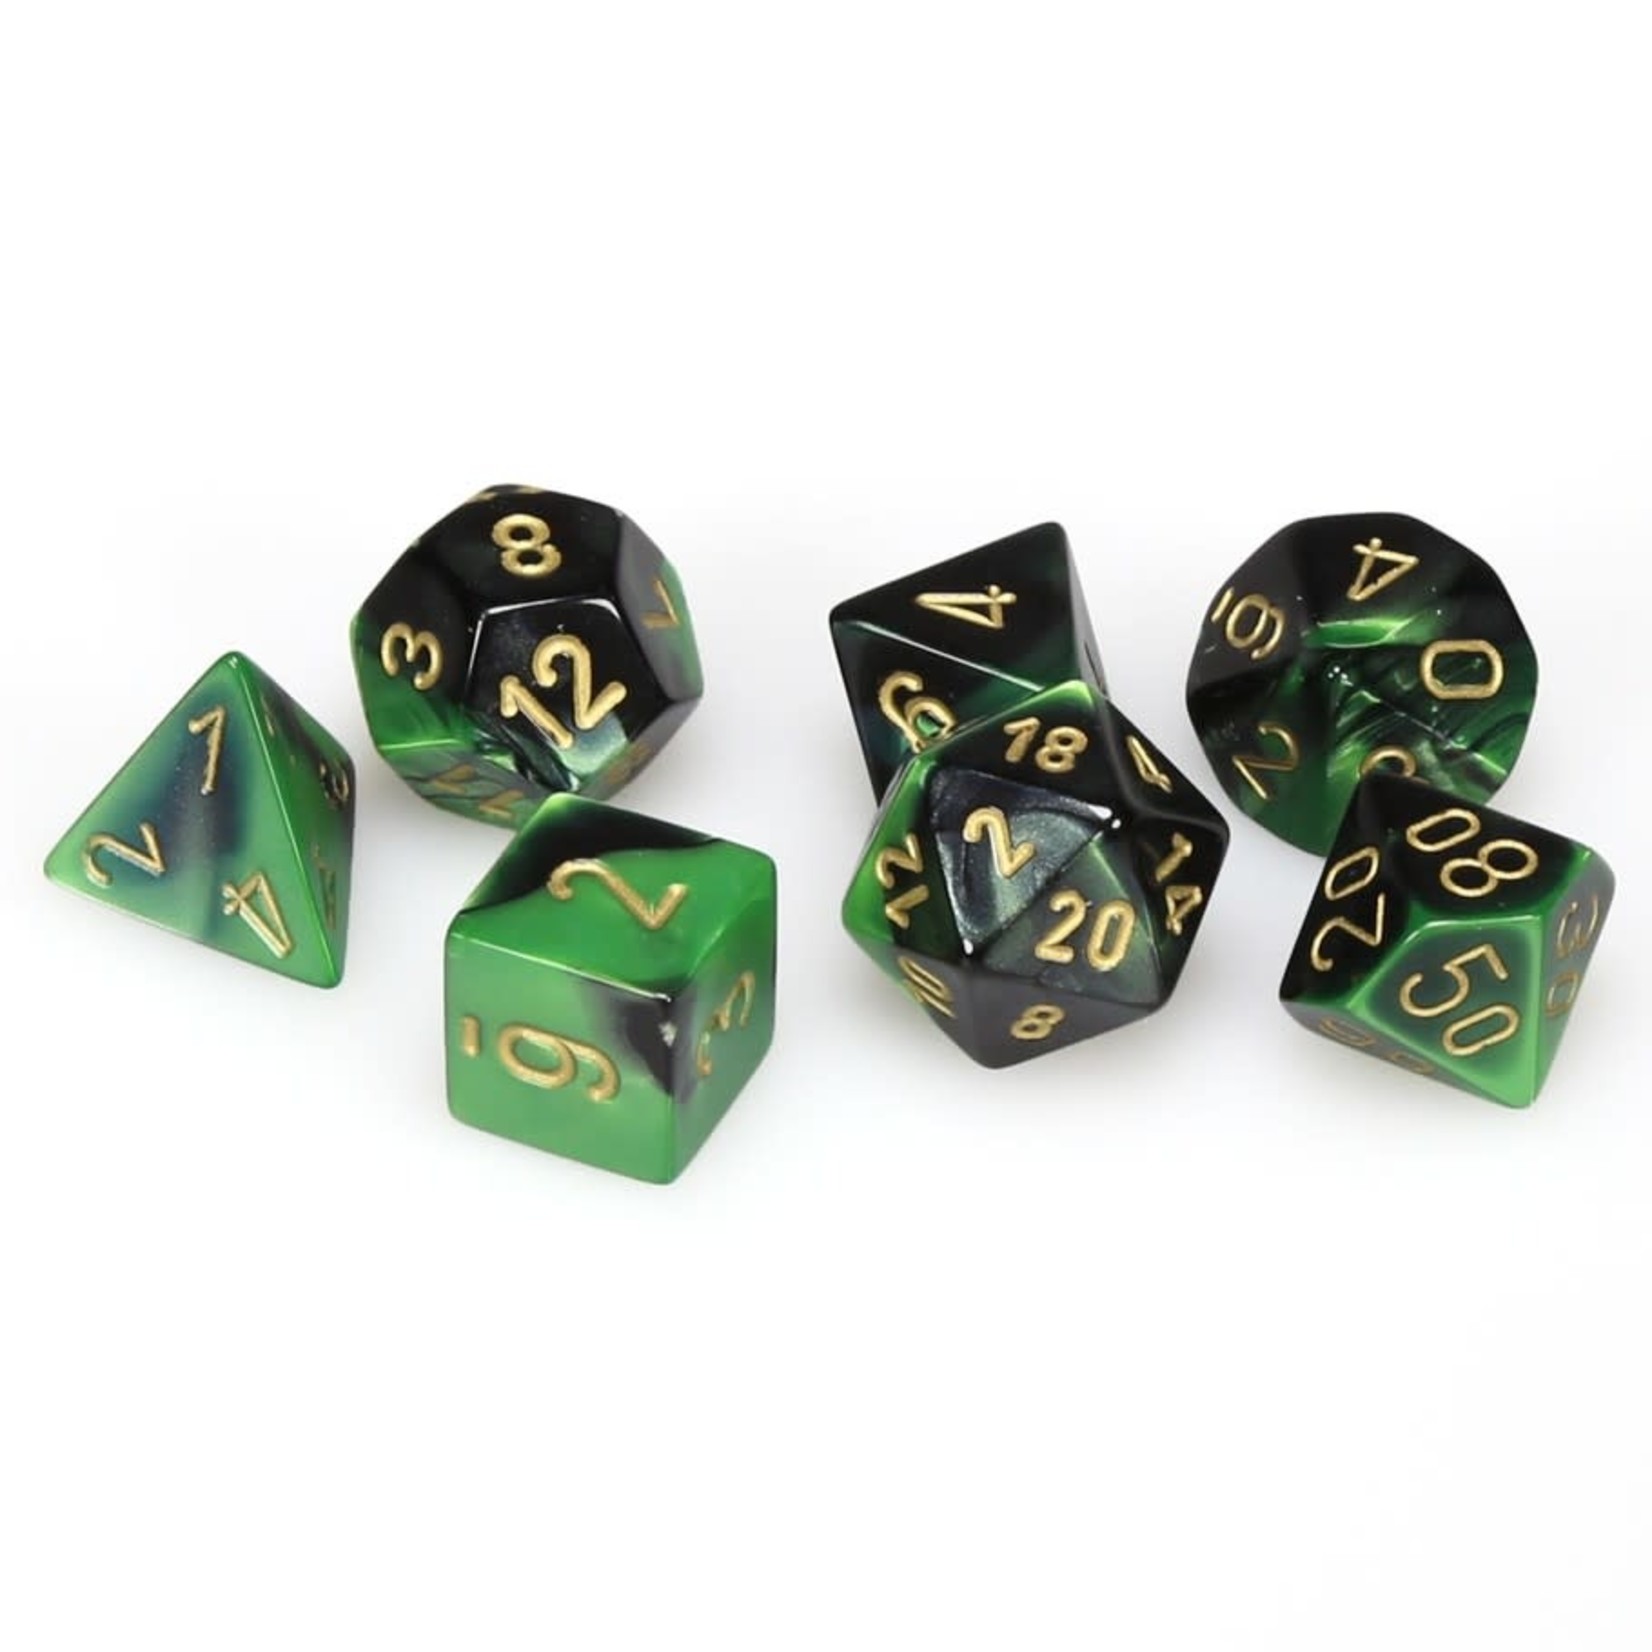 Chessex Chessex Gemini Black / Green with Gold Polyhedral 7 die set